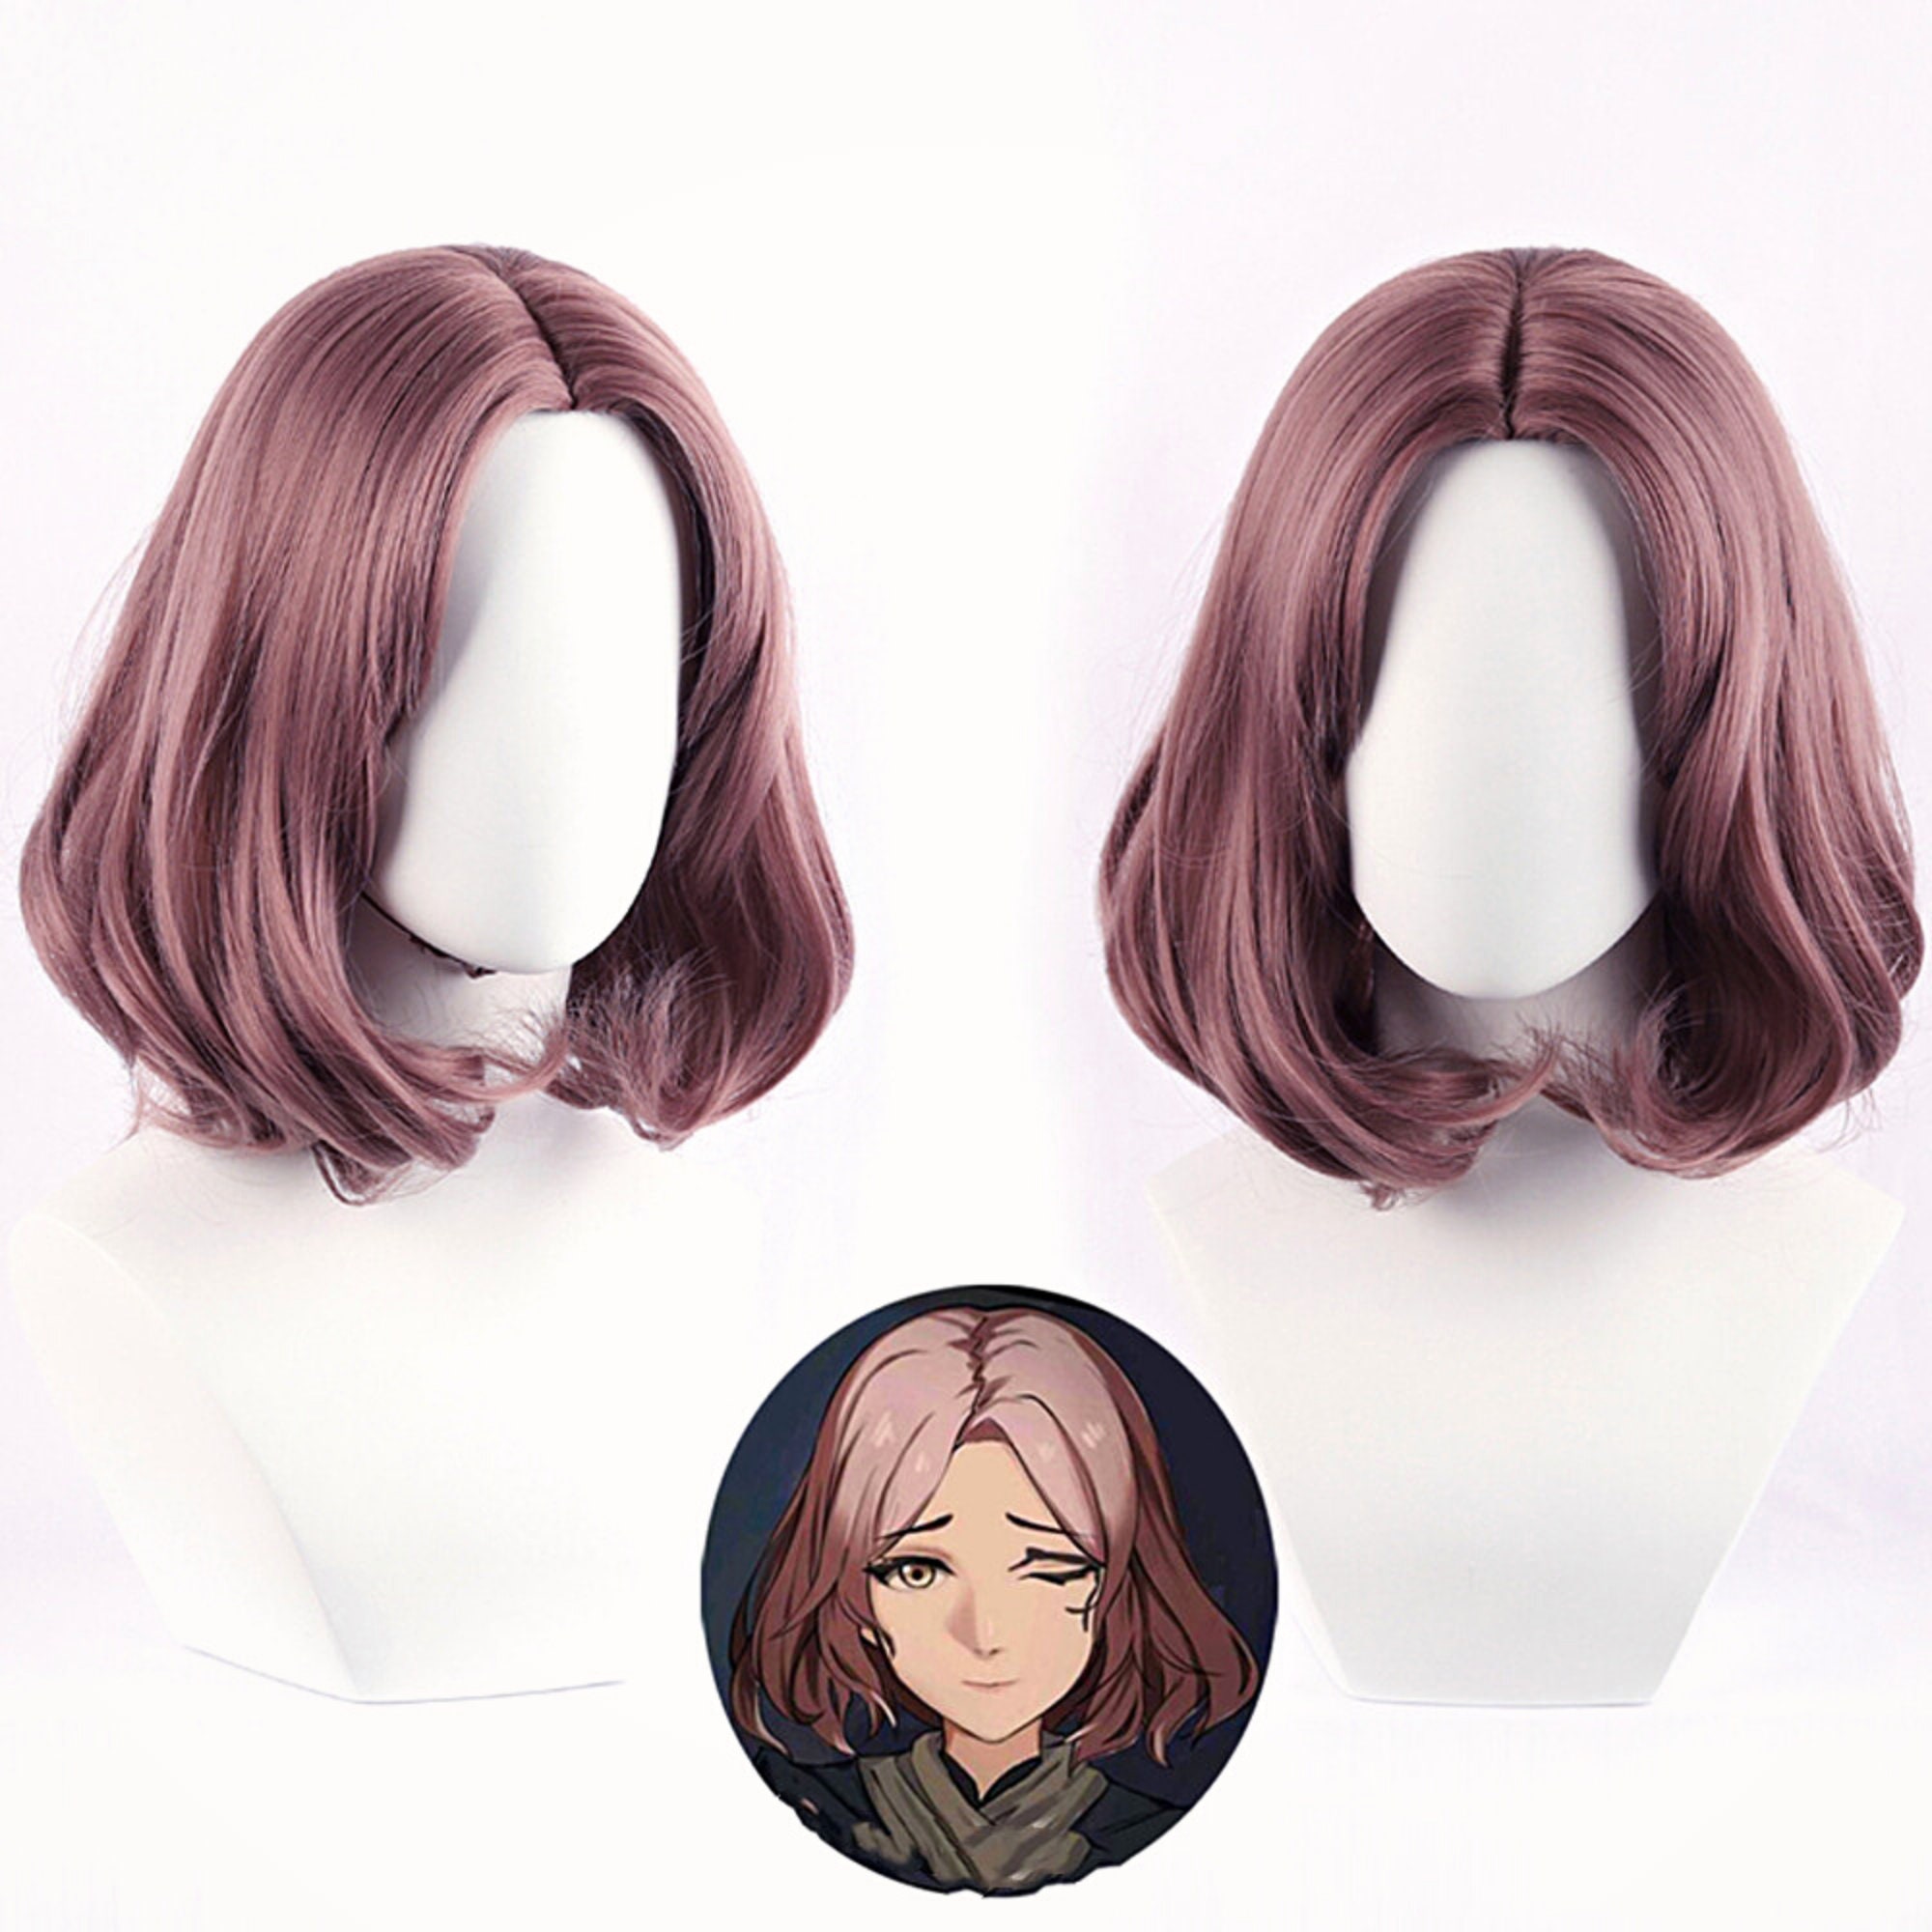 Elden Ring Melina Cosplay Wig, Cosplay Party Wig, Dusty Rose Pink Wavy Wig,  Short Centre Parting Curly Cosplay Wig, Elden Ring Cosplay - Etsy